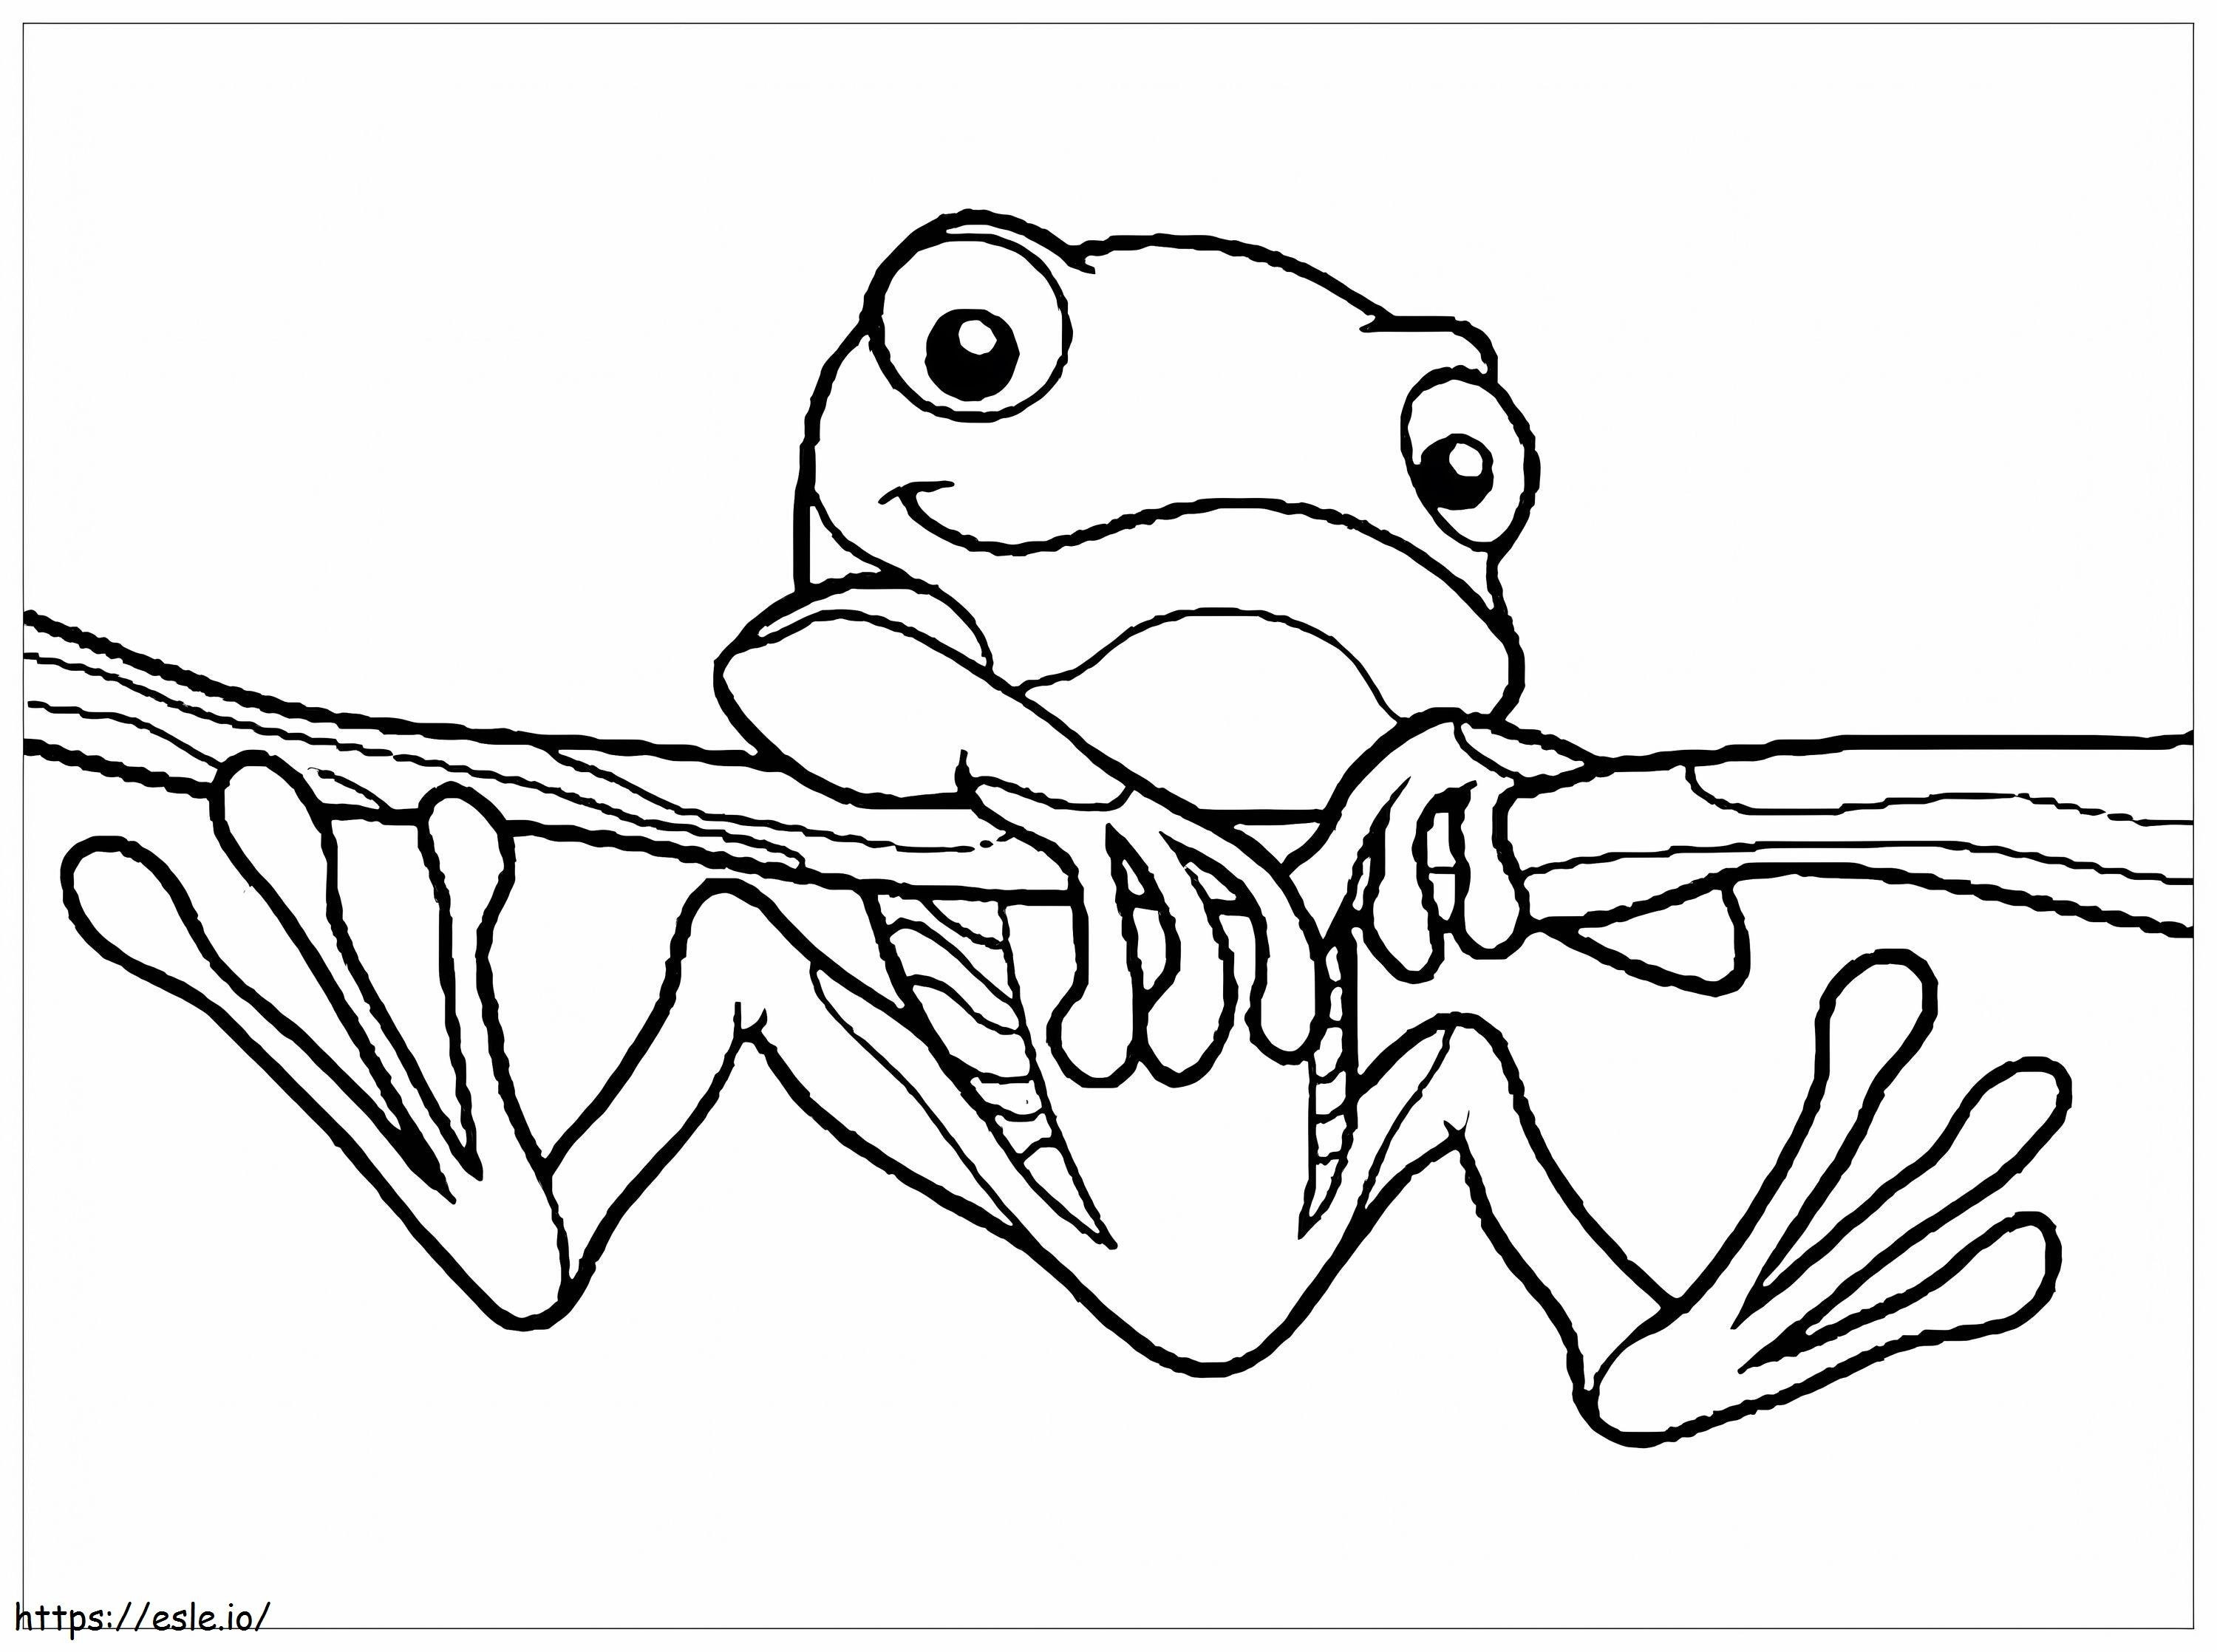 Cute Frog Climbing Tree Branch coloring page